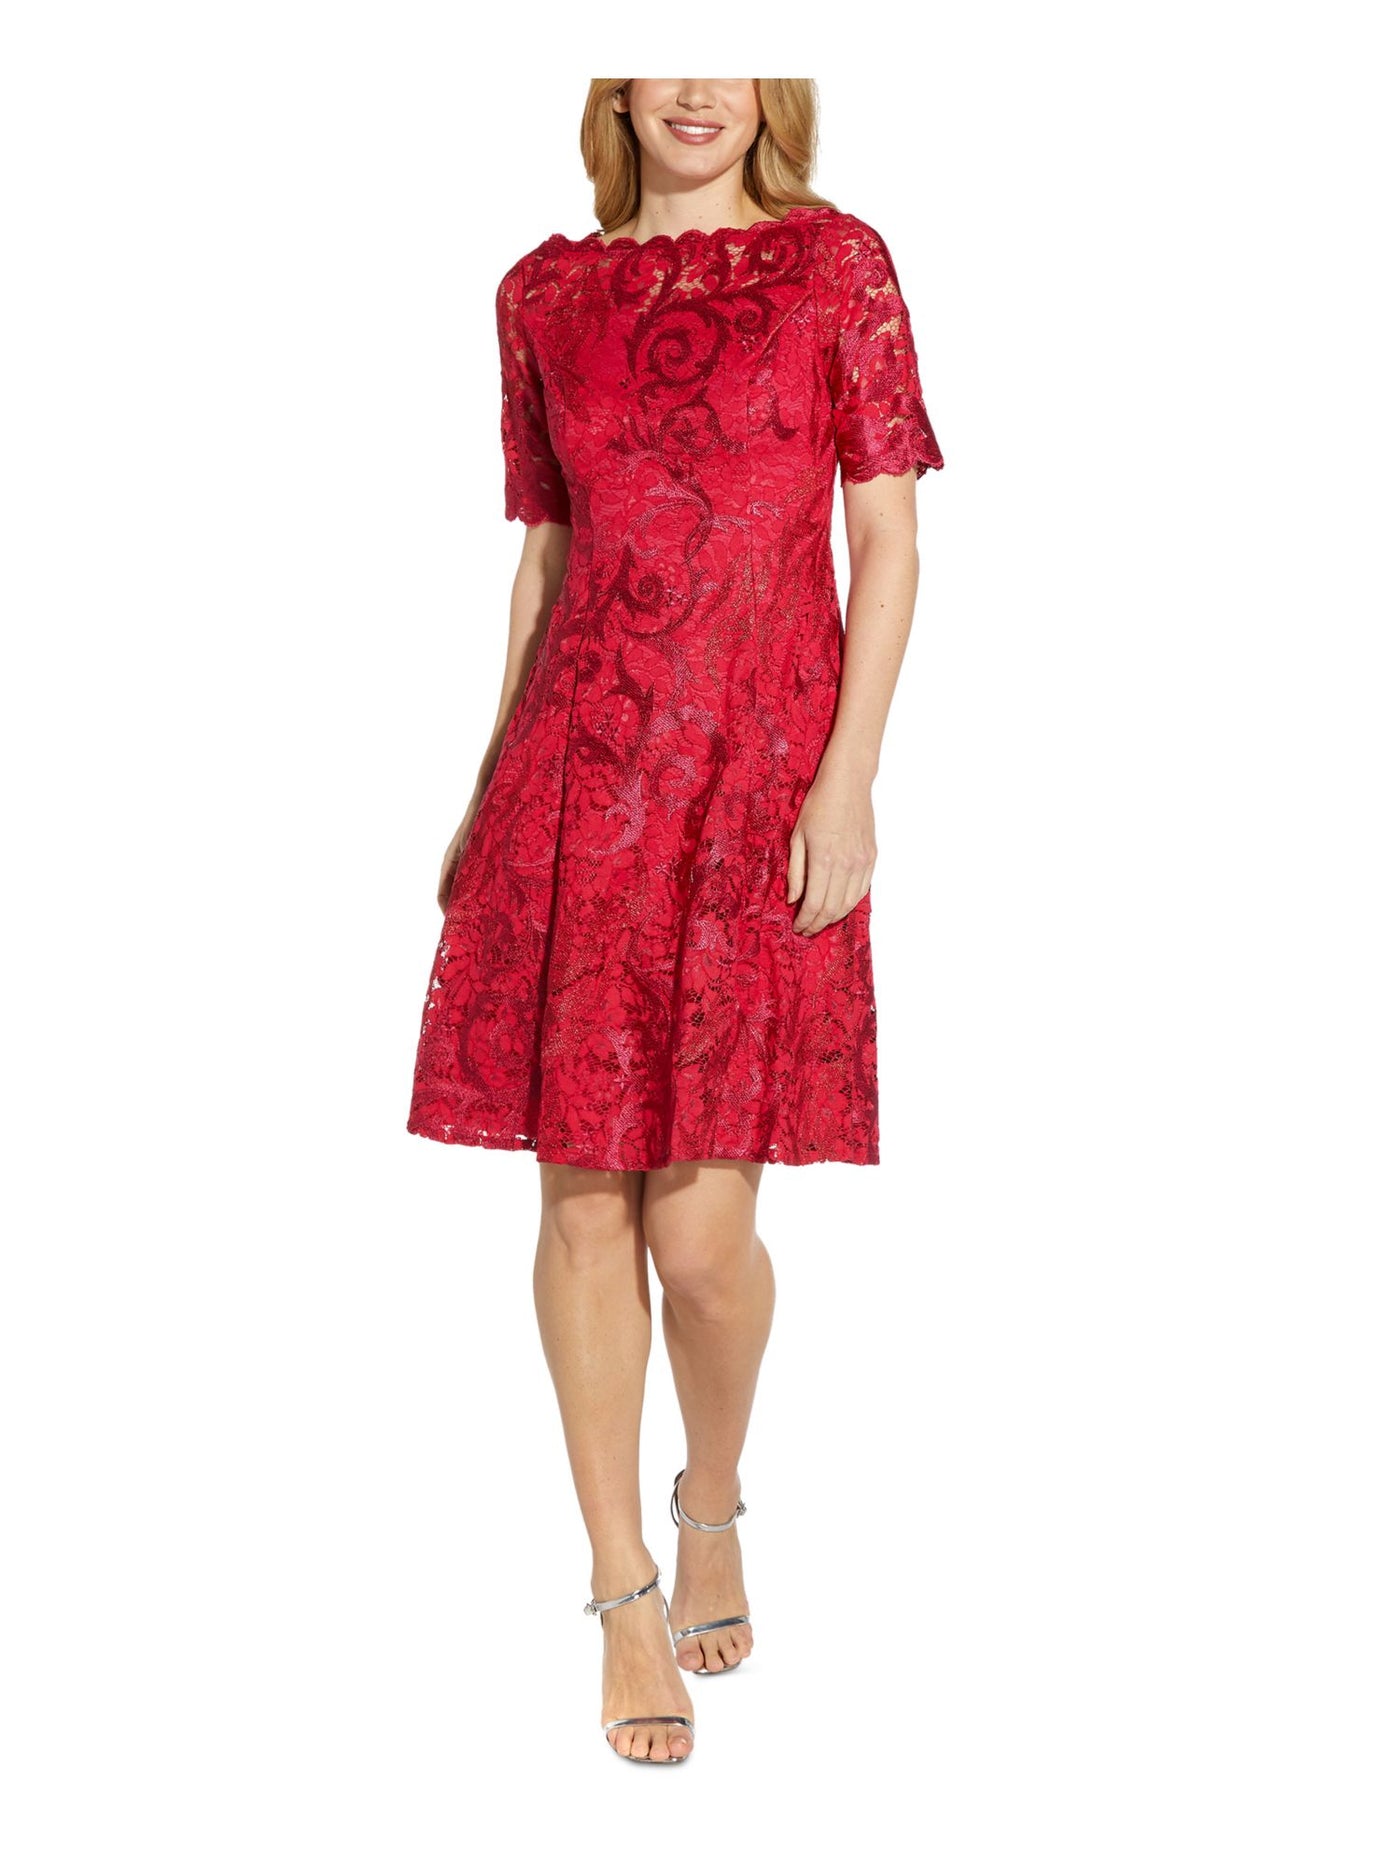 ADRIANNA PAPELL Womens Red Scalloped Lace Zippered Lined Floral Short Sleeve Boat Neck Above The Knee Cocktail Fit + Flare Dress 8